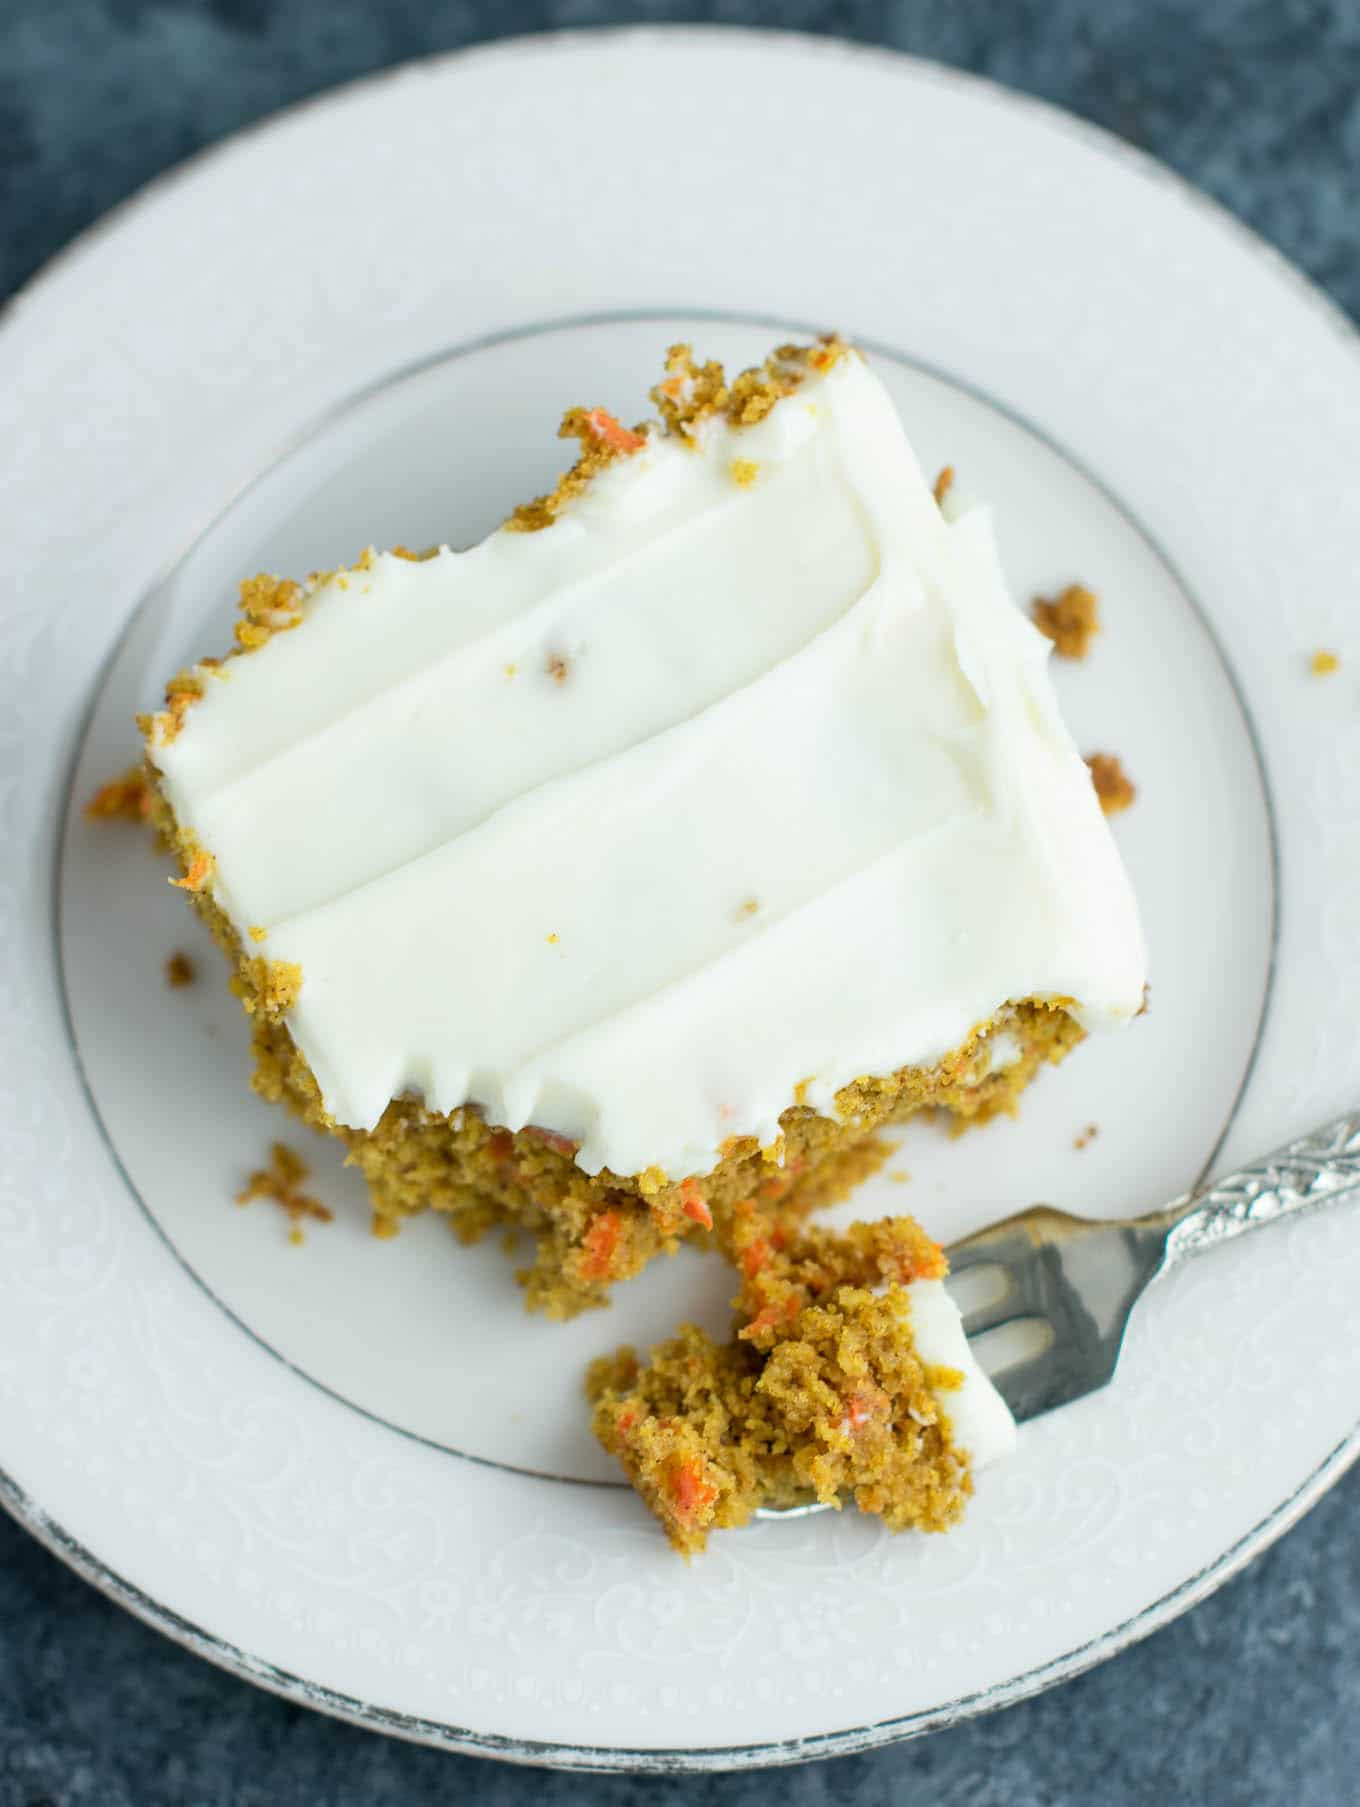 Best Gluten Free Carrot Cake
 Gluten Free Carrot Cake Recipe with cream cheese frosting